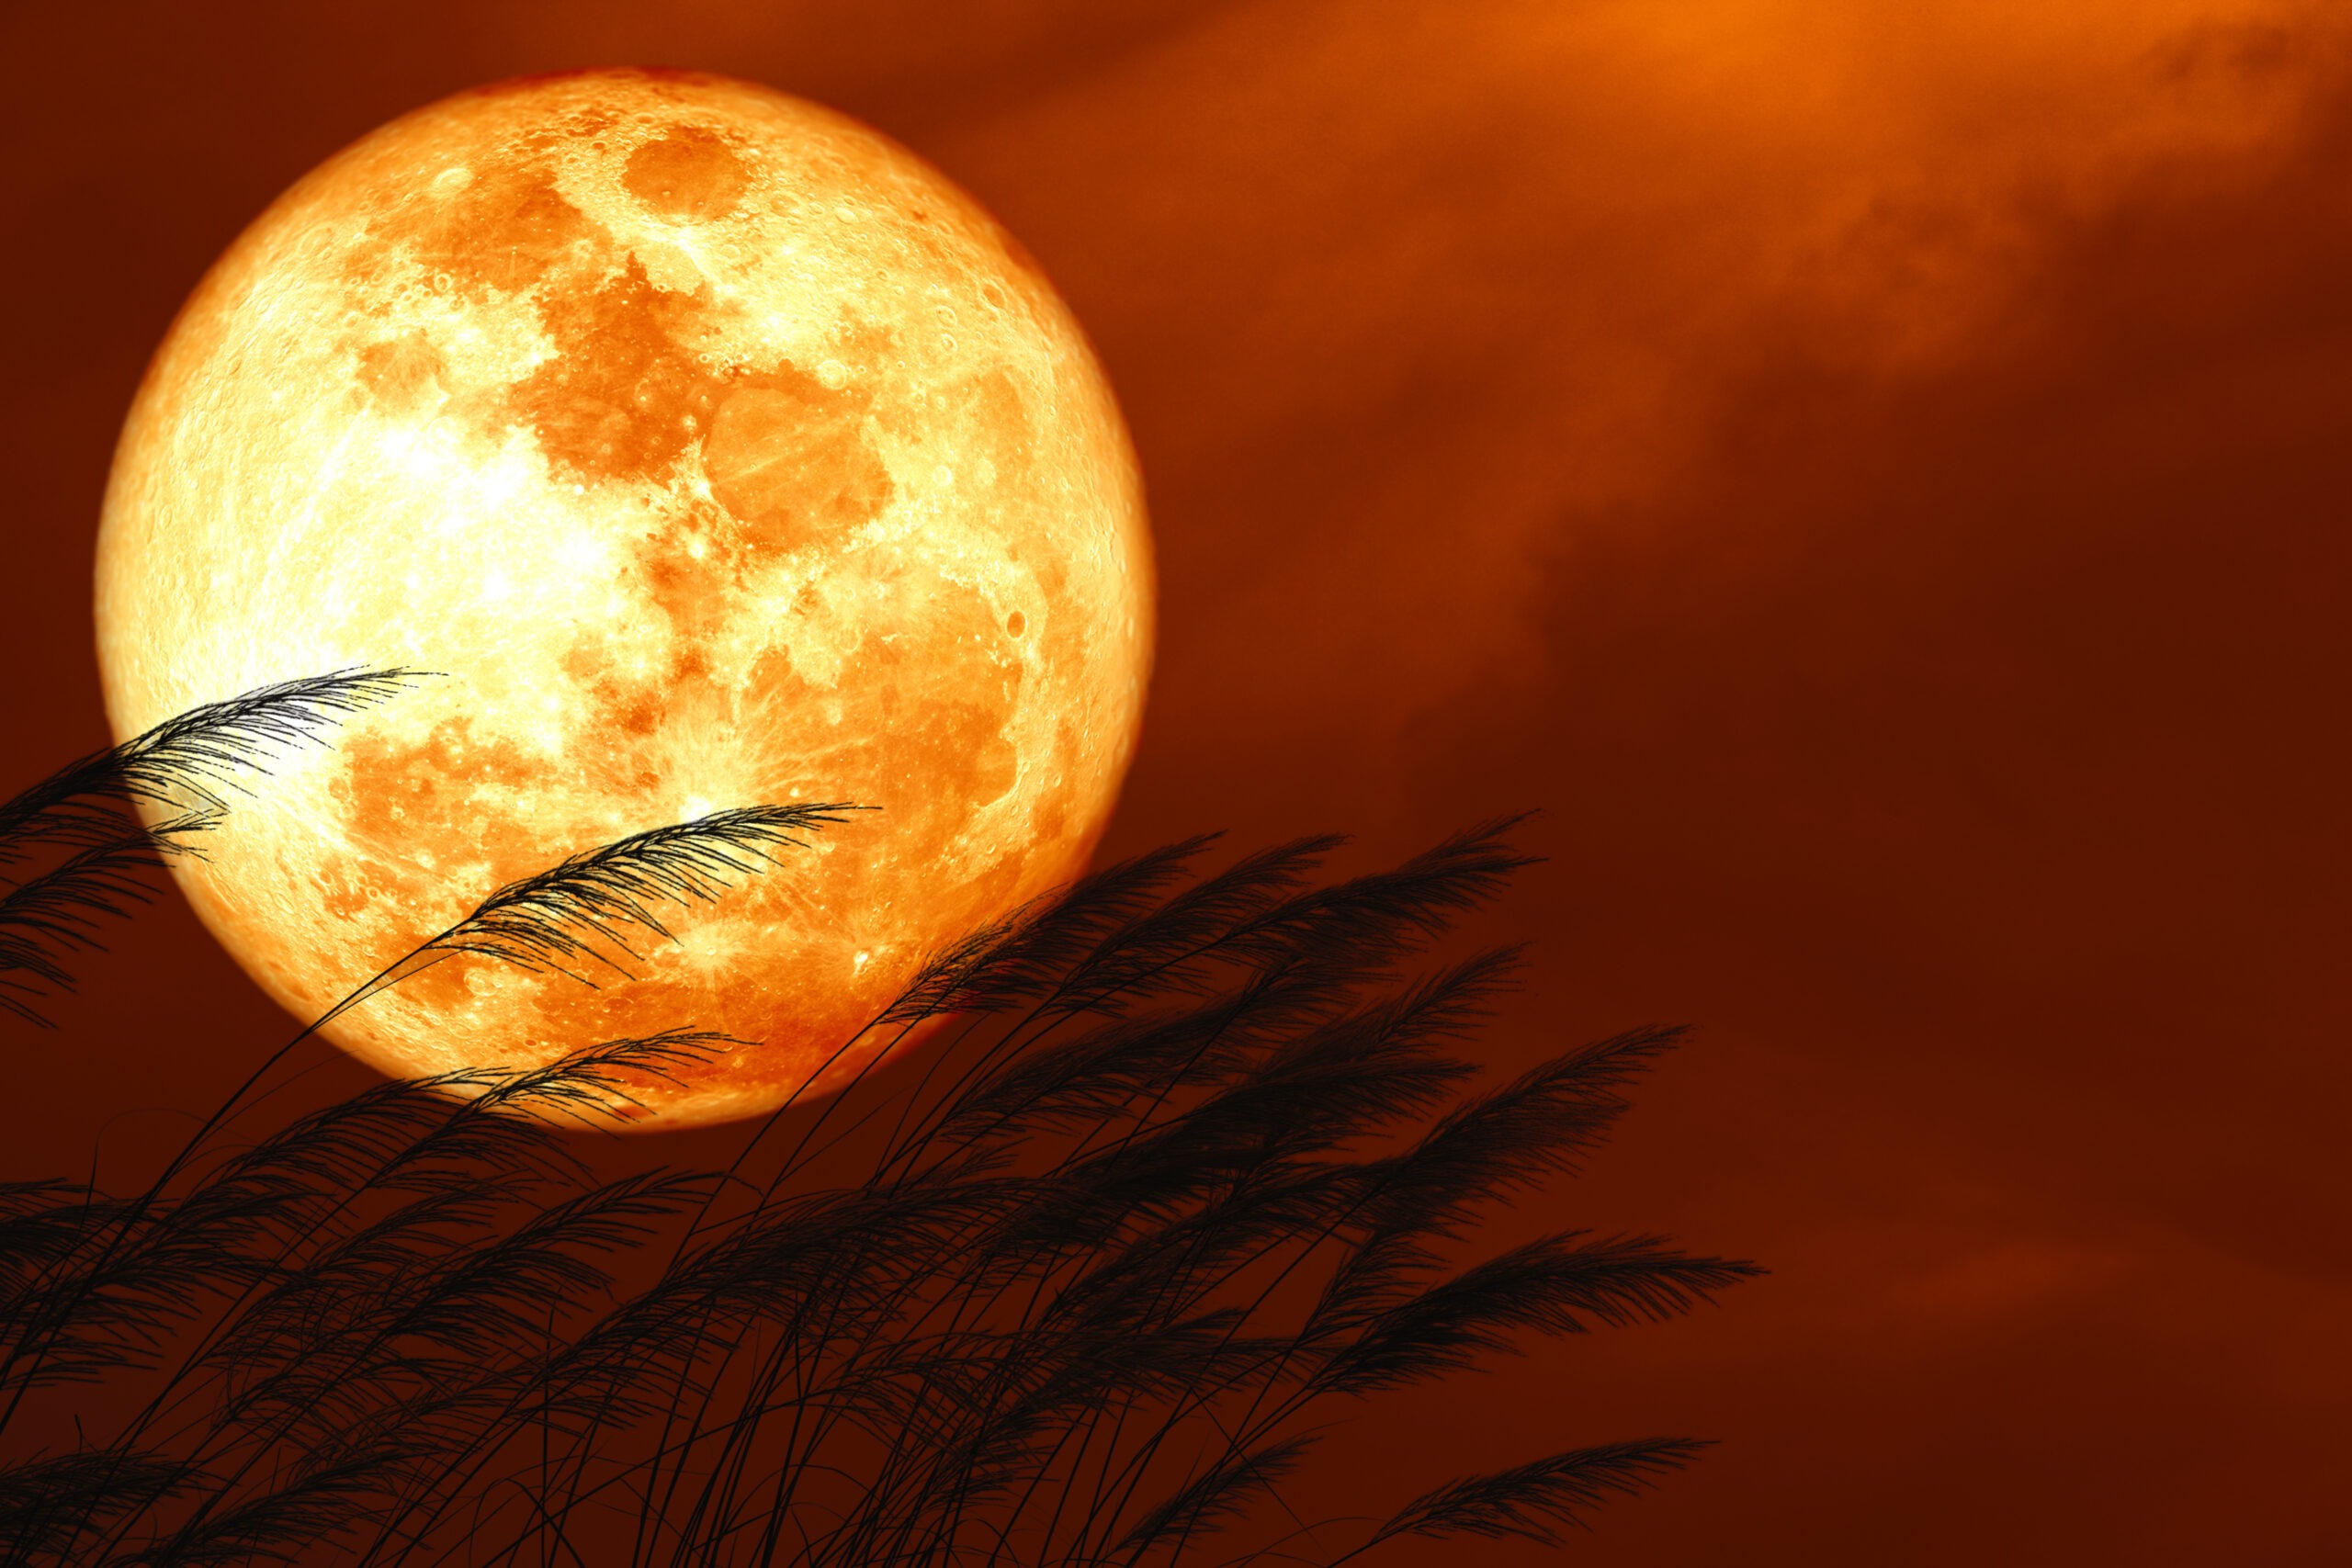 You'll Be Able To See A Full Corn Moon Tonight. Here's How.